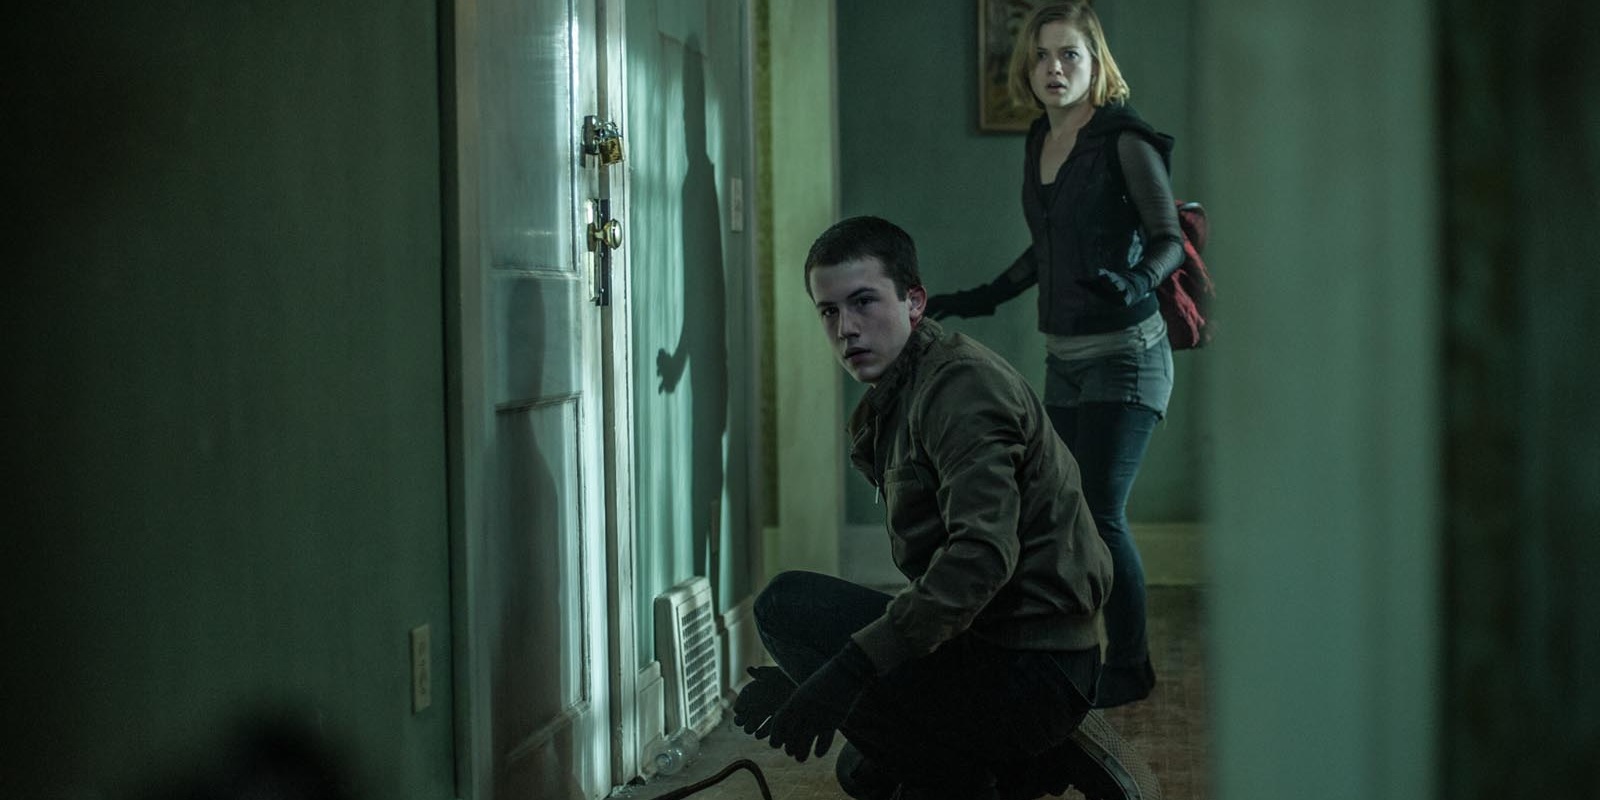 Amazing Don't Breathe Pictures & Backgrounds